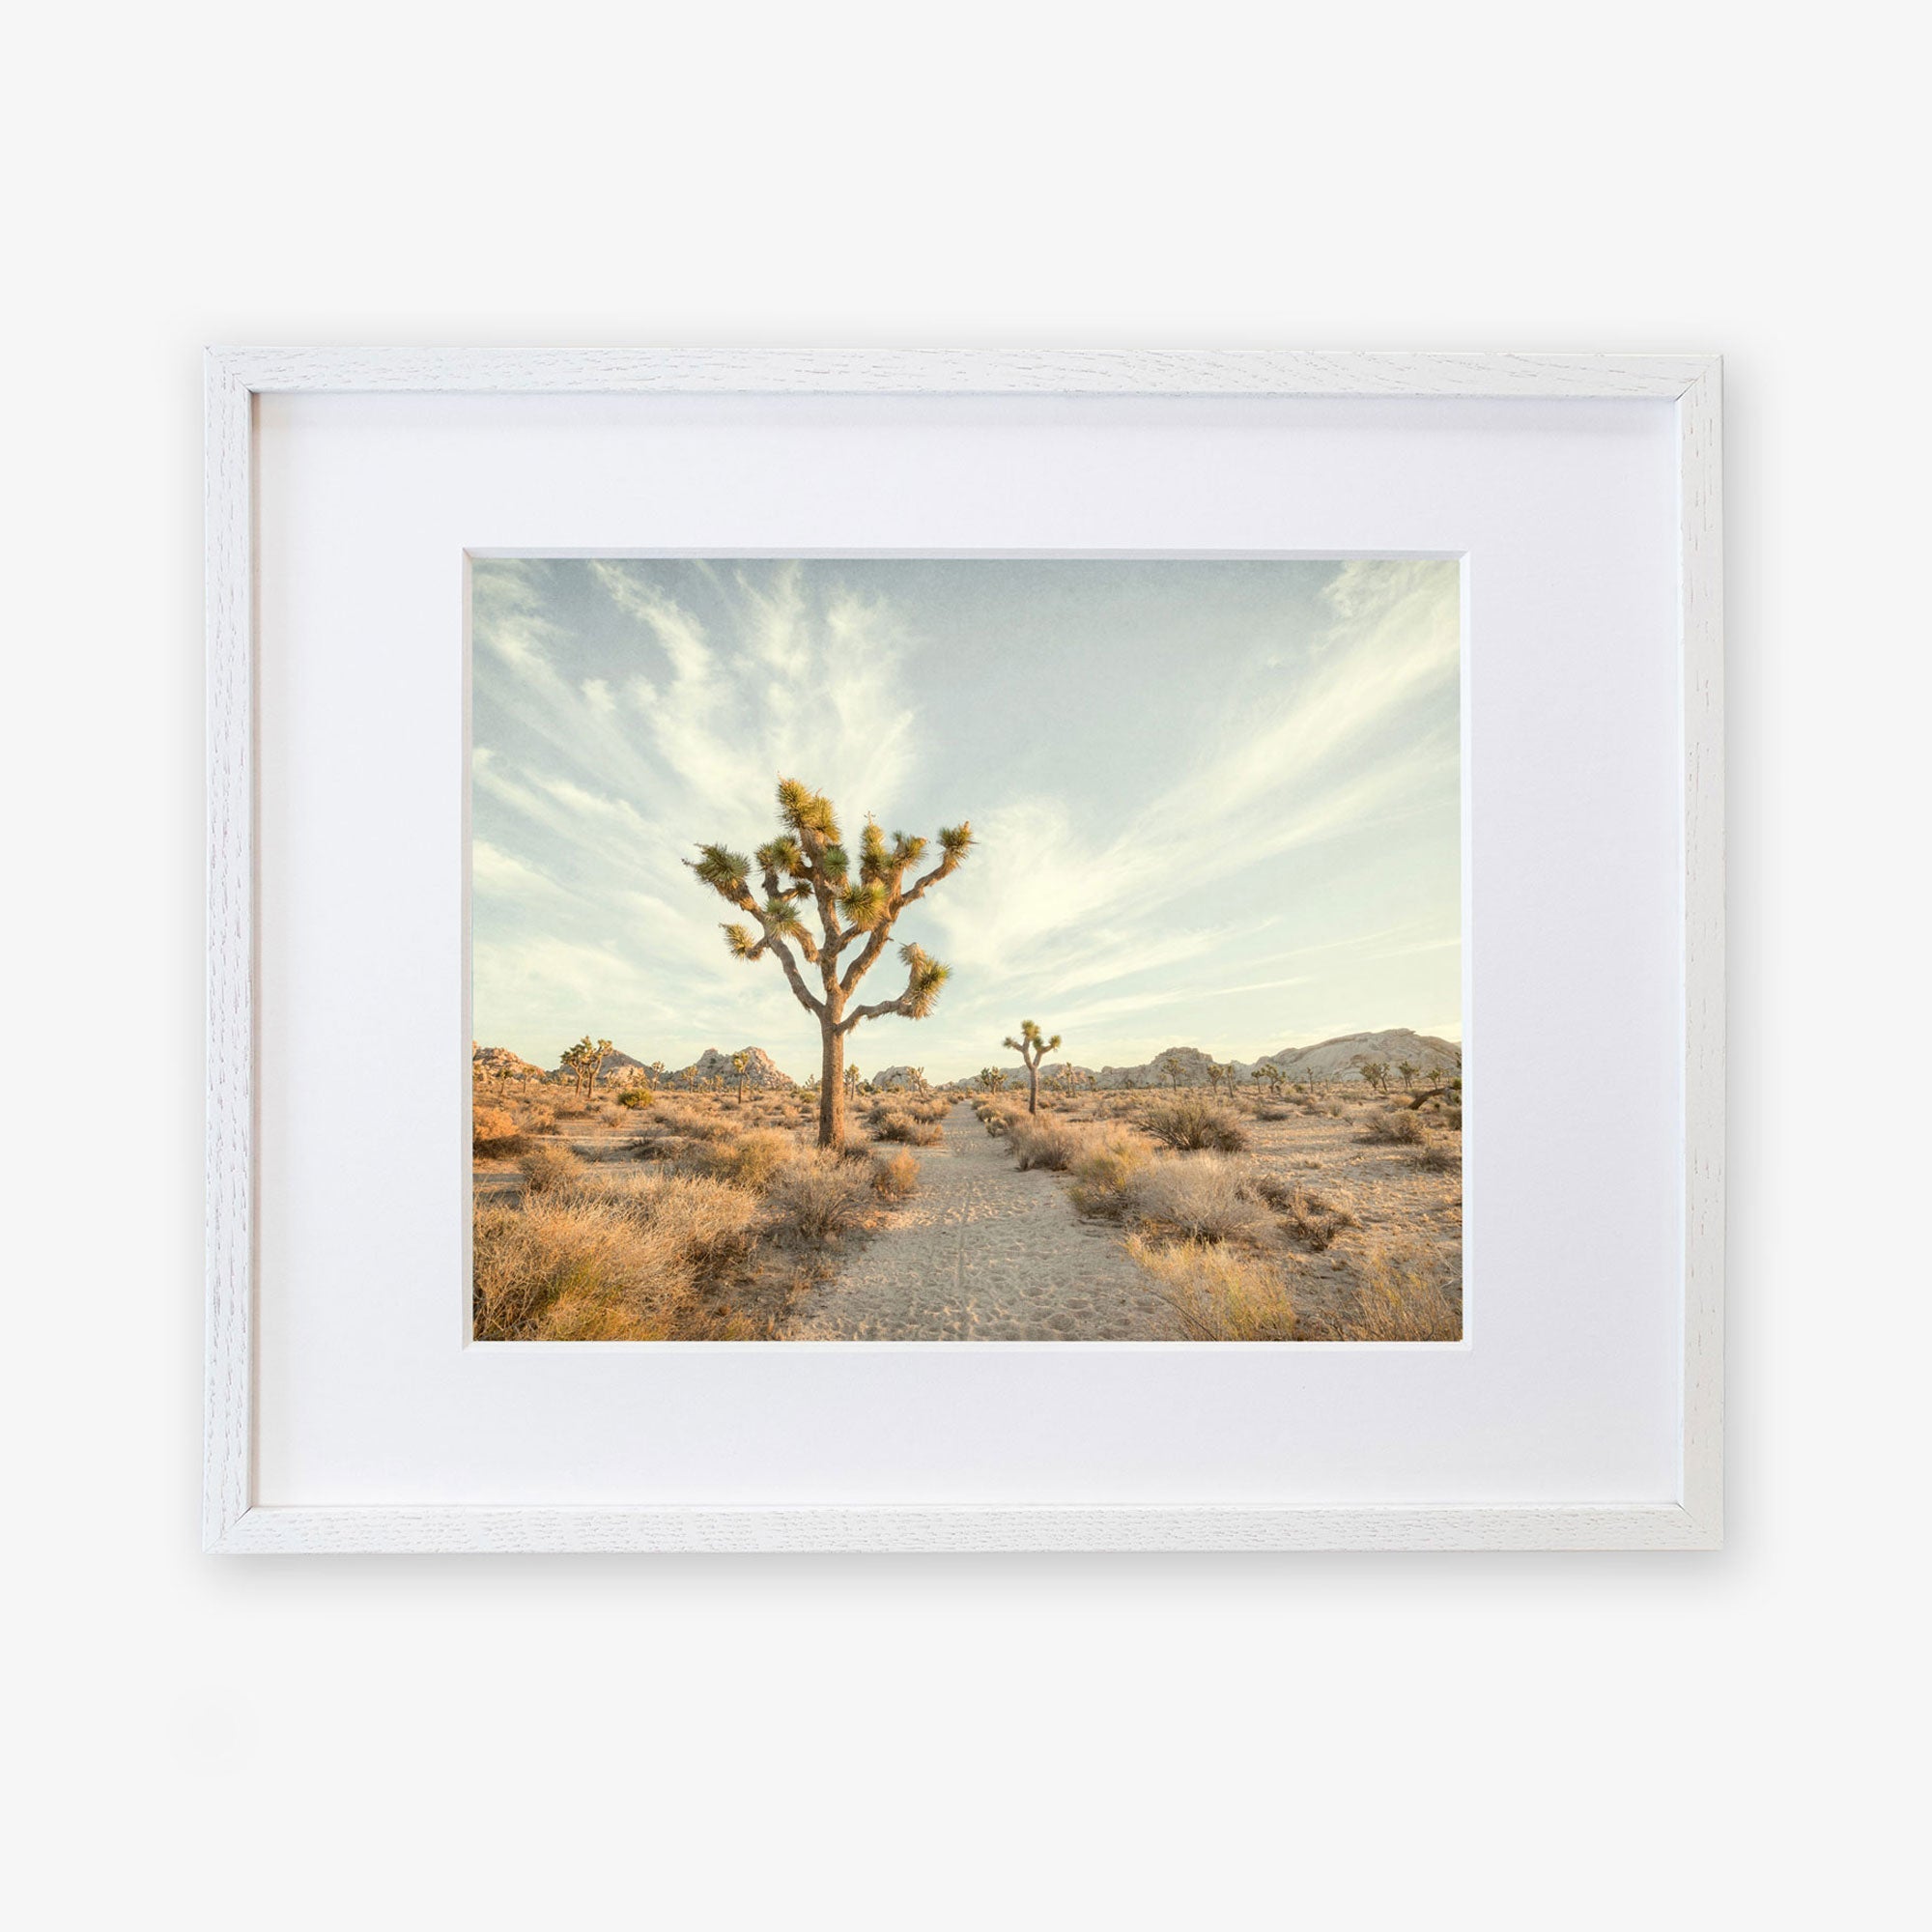 A framed photograph of a desert landscape featuring a prominent Joshua Tree under a sky streaked with wispy clouds, surrounded by sparse desert vegetation on archival photographic paper. 

Product Name: Offley Green Joshua Tree Print, &#39;Path to Joshua&#39;